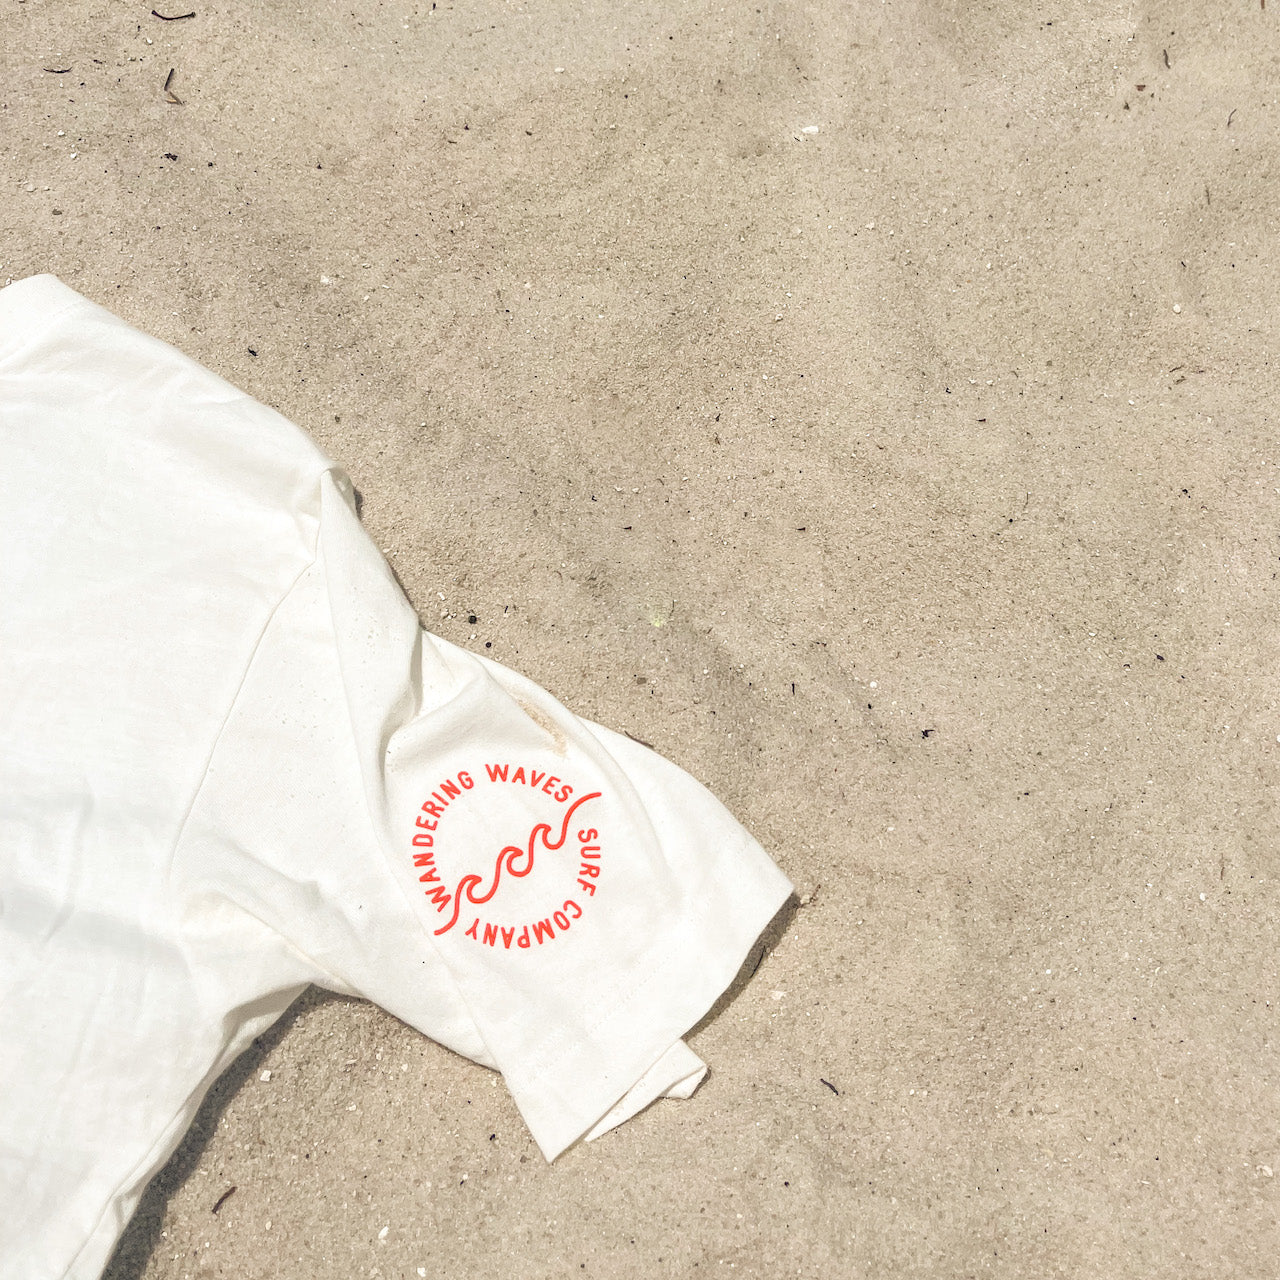 Protect your Playground oversized organic cotton tee from Wandering Waves Surf Company